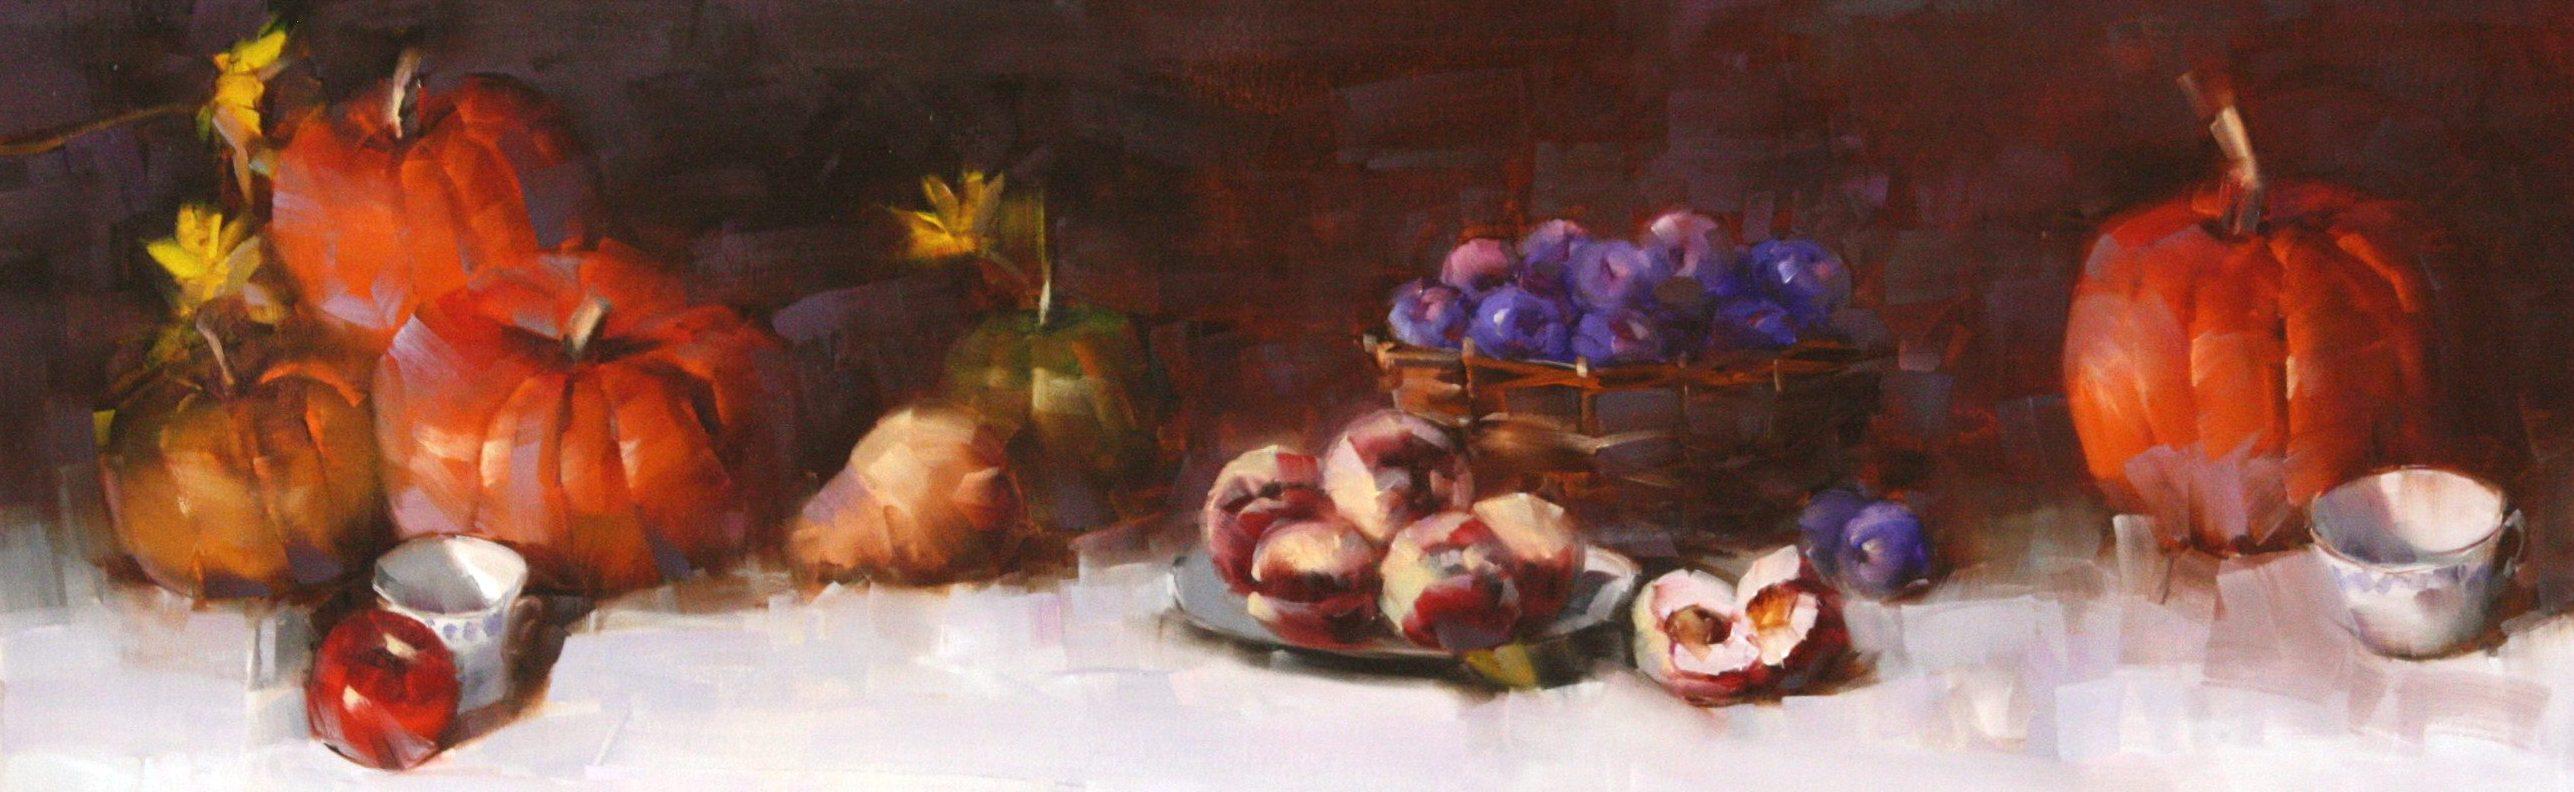 Still Life with Pumpkins, Original Oil Painting, Ready to Hang - Gray Still-Life Painting by Vahe Yeremyan